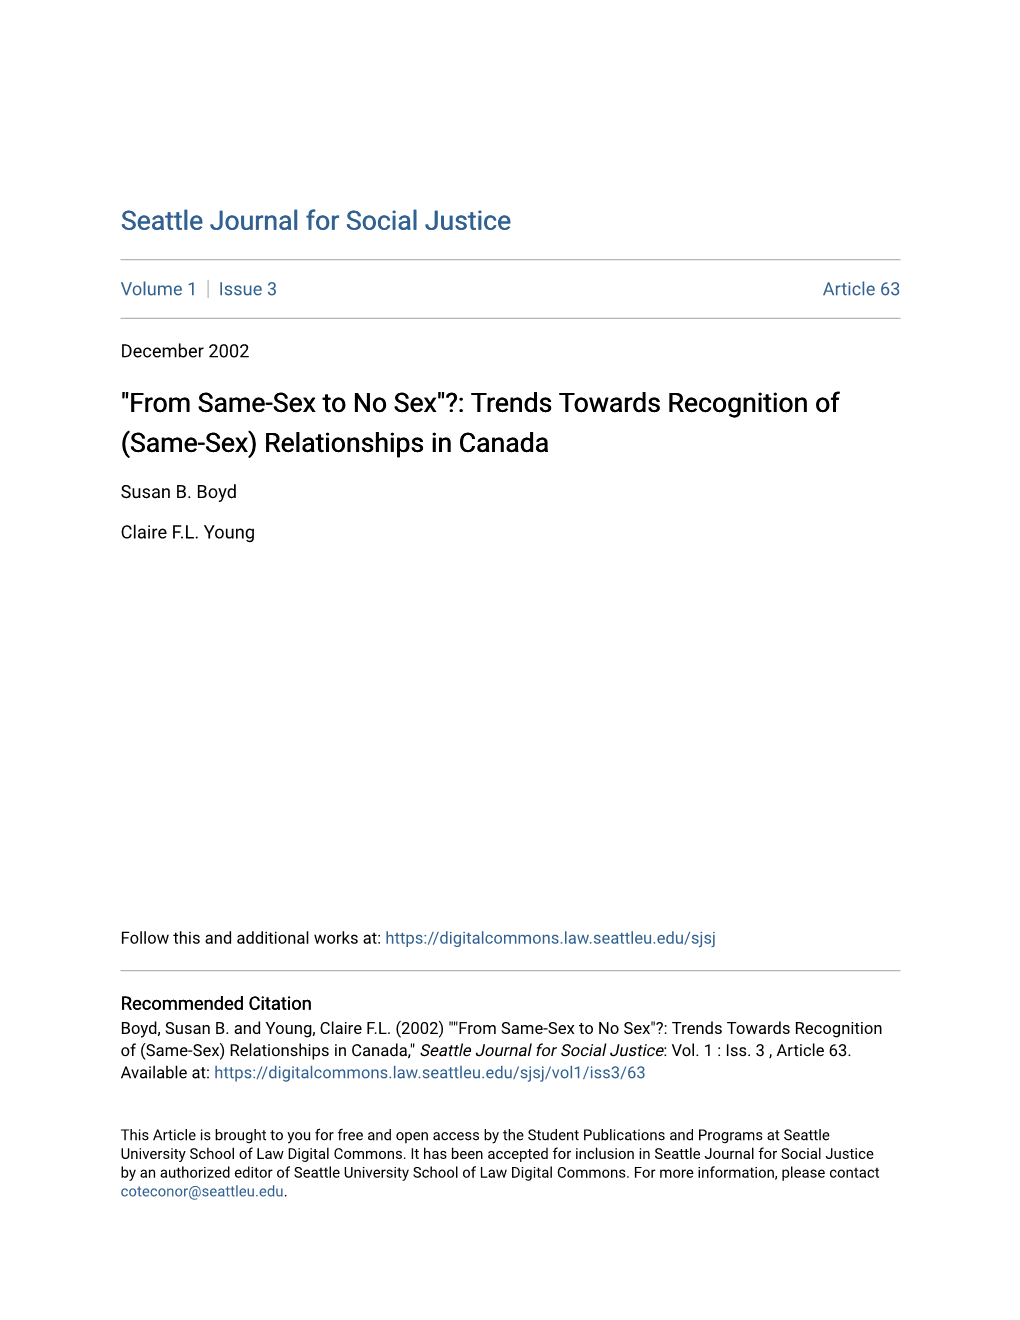 Trends Towards Recognition of (Same-Sex) Relationships in Canada